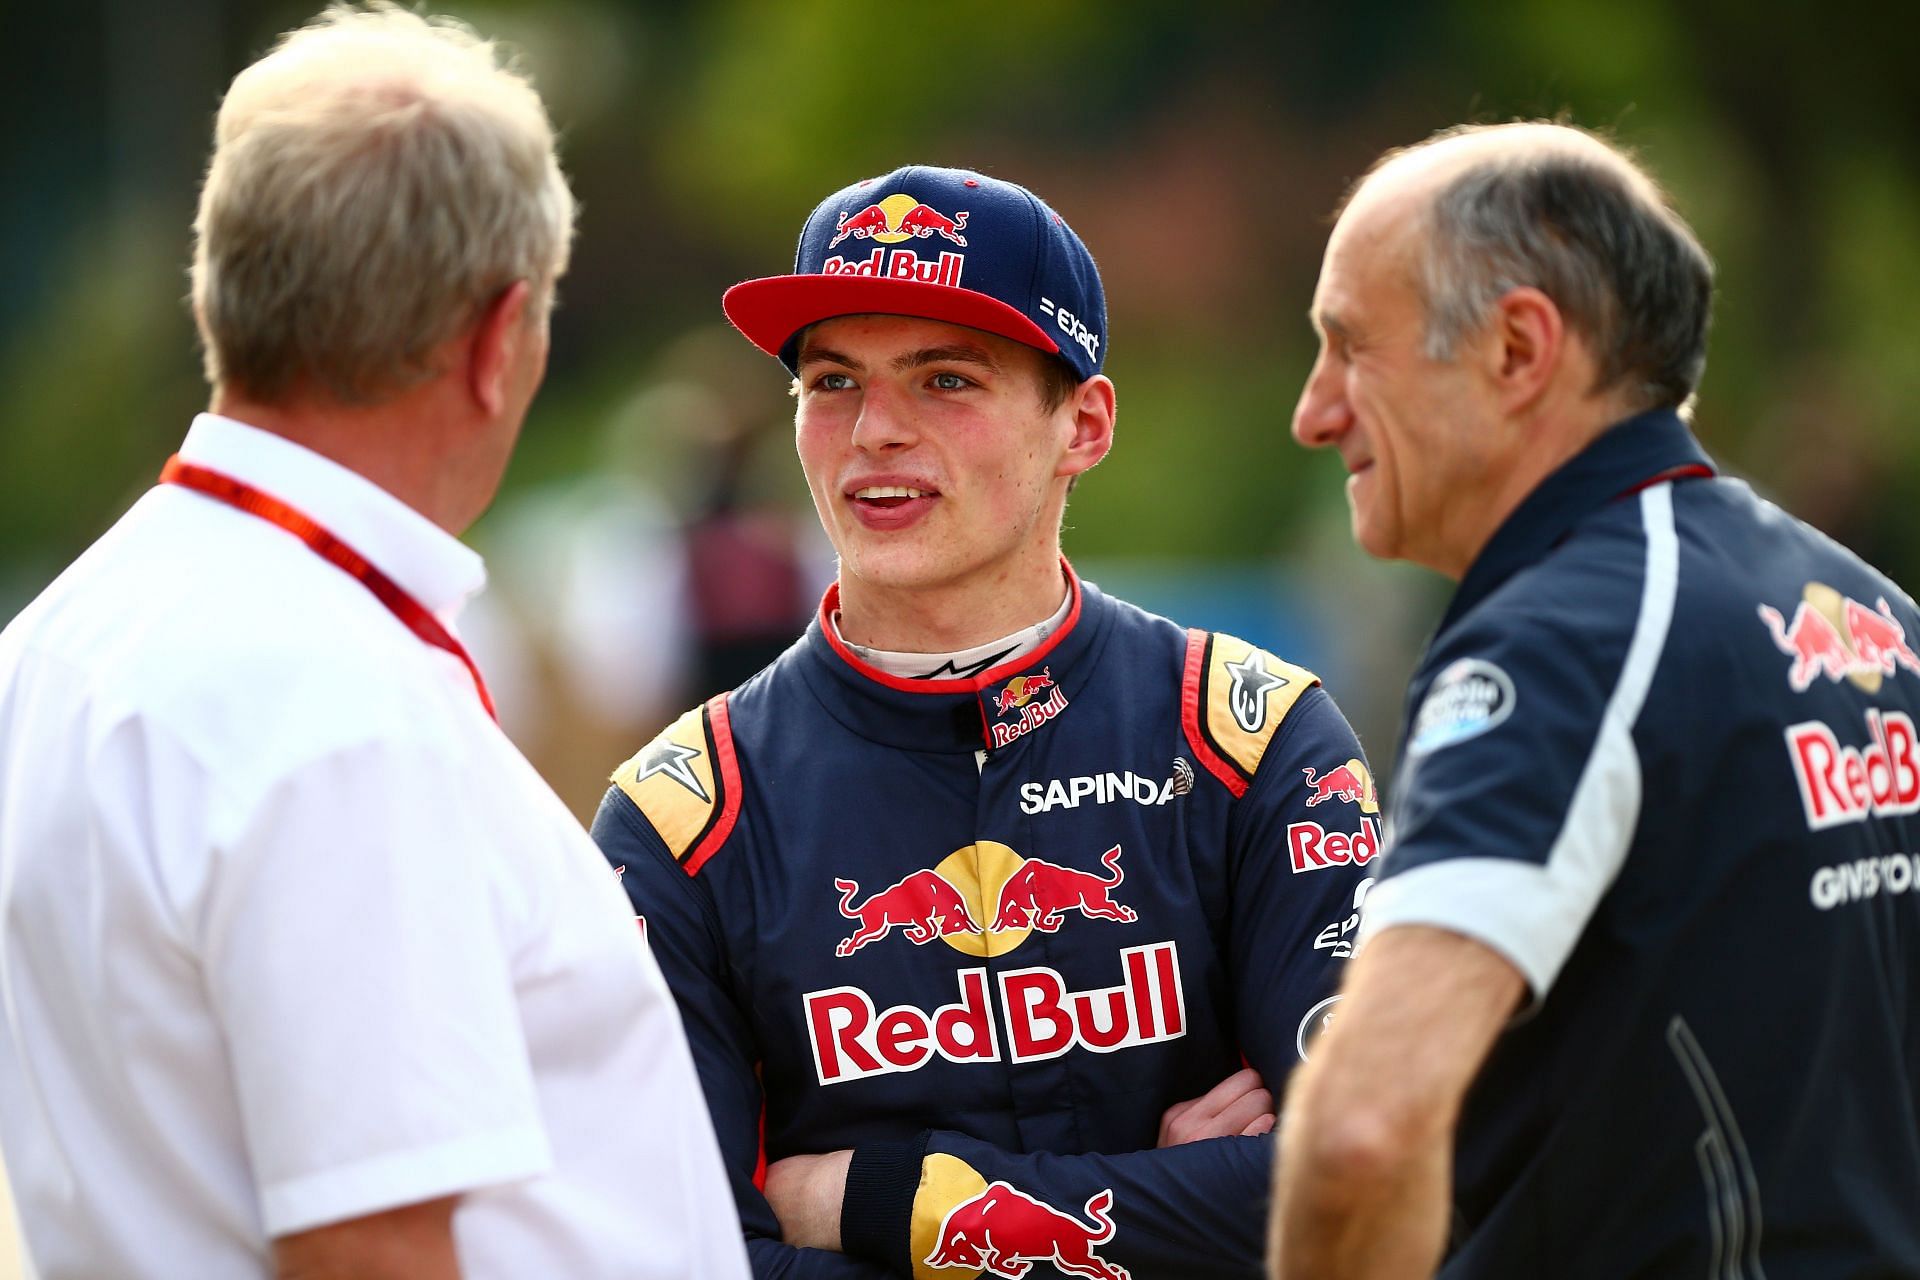 Max Verstappen talks to Red Bull Racing team consultant Dr. Helmut Marko (left) and Scuderia Toro Rosso team principal Franz Tost (right) during the Formula One Grand Prix of China at Shanghai International Circuit on April 17, 2016, in Shanghai, China (Photo by Dan Istitene/Getty Images)